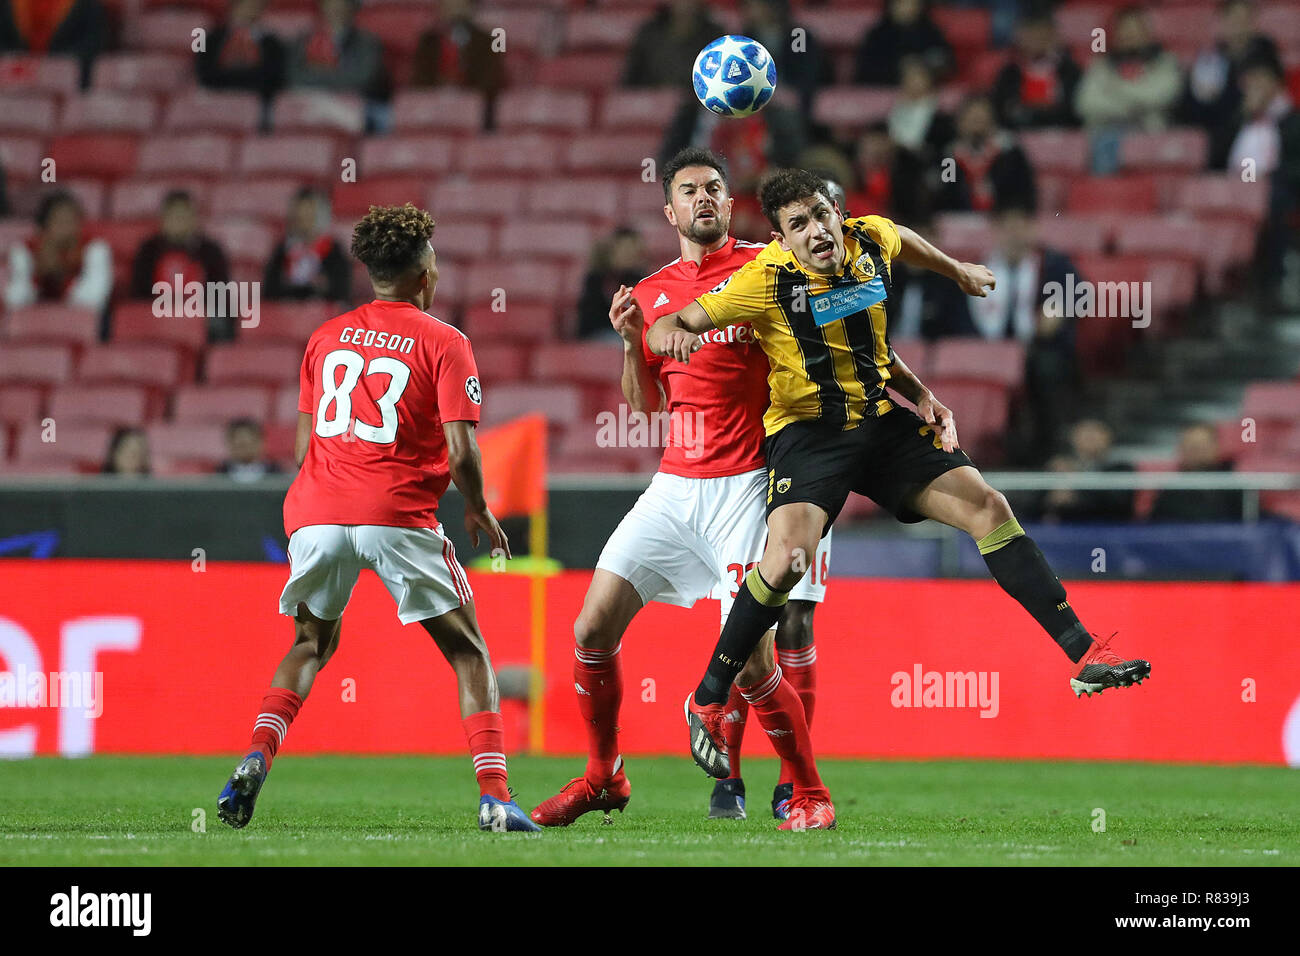 Jardel Nivaldo Vieira of SL Benfica (L) vies for the ball with Ezequiel  Ponce of AEK Athens F.C. (R) during the UEFA Champions League 2018/19  football match between SL Benfica vs AEK